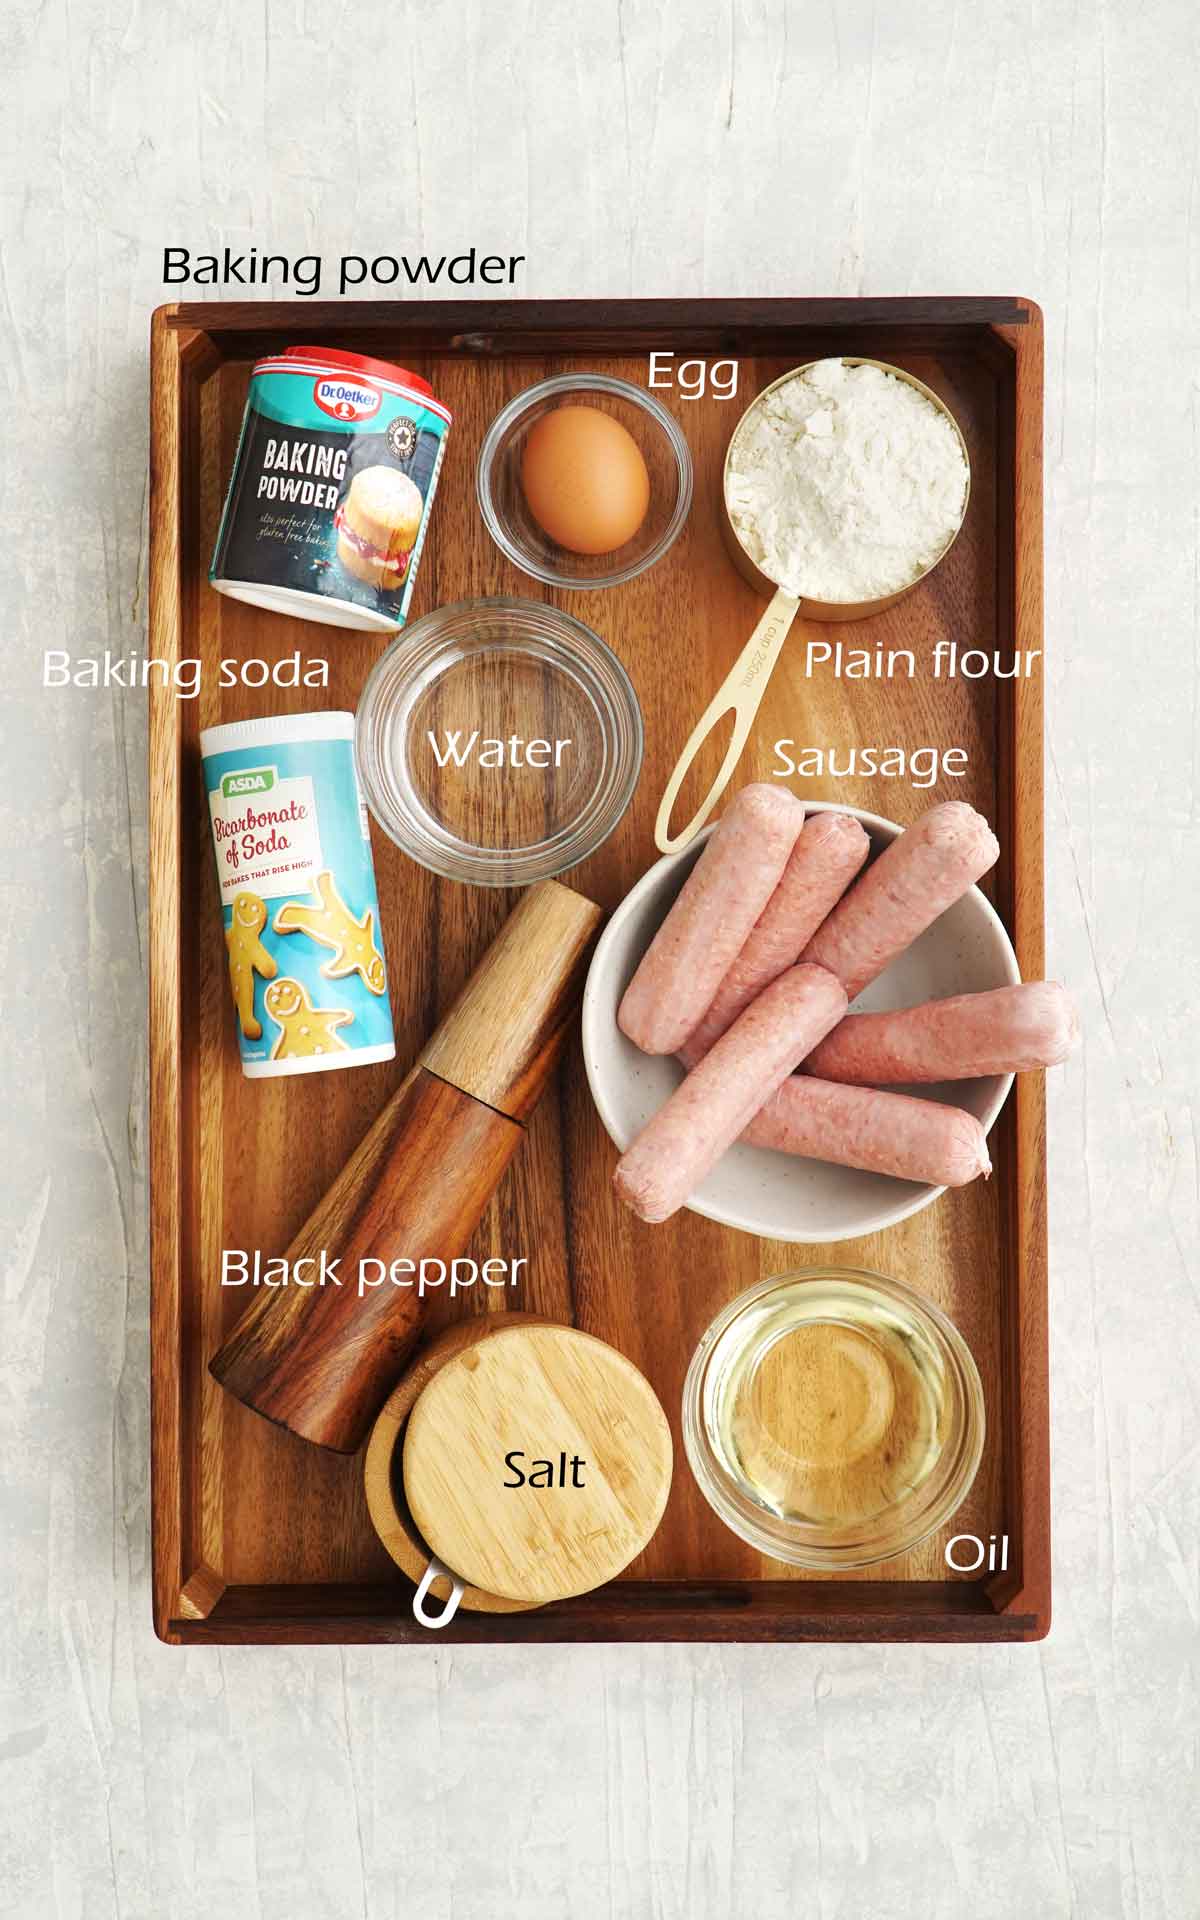 Labelled ingredients displayed on the wooden tray. 